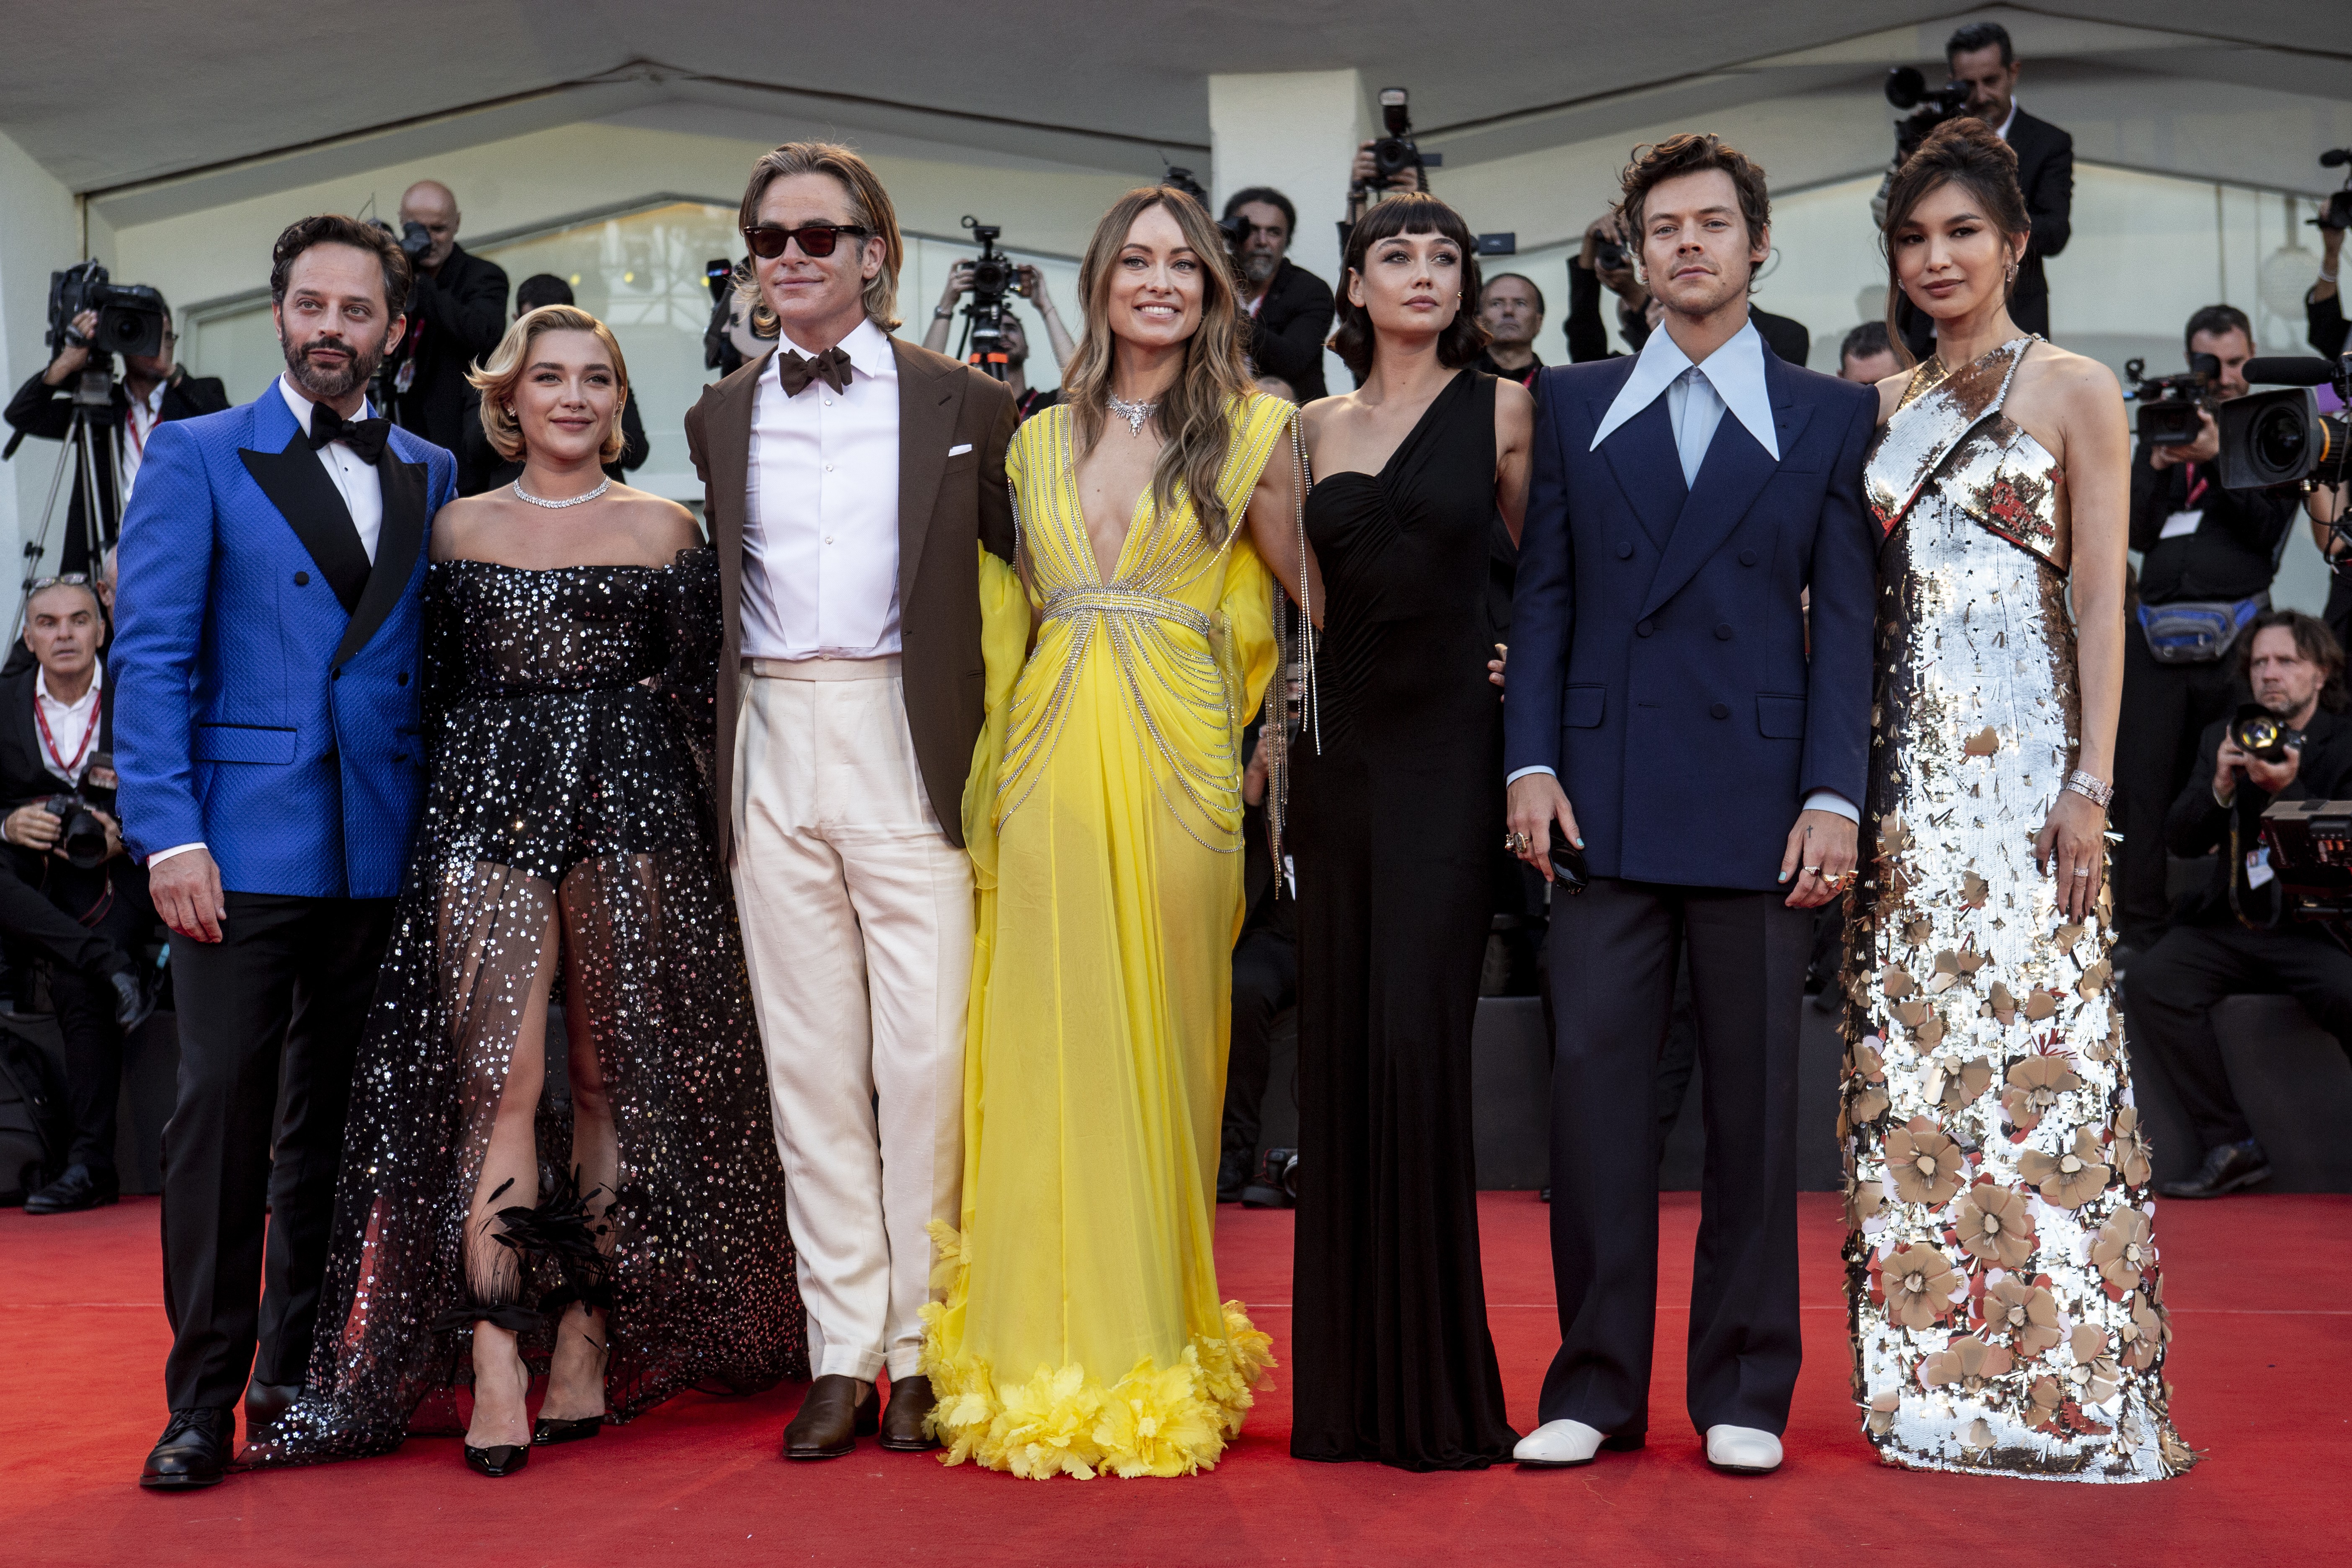 The cast of Don't Worry Honey: Nick Kroll, Florence Pugh, Chris Pine, Olivia Wilde, Sydney Chandler, Harry Styles and Gemma Chan on the red carpet at the Venice Film Festival (Photo: Getty Images)